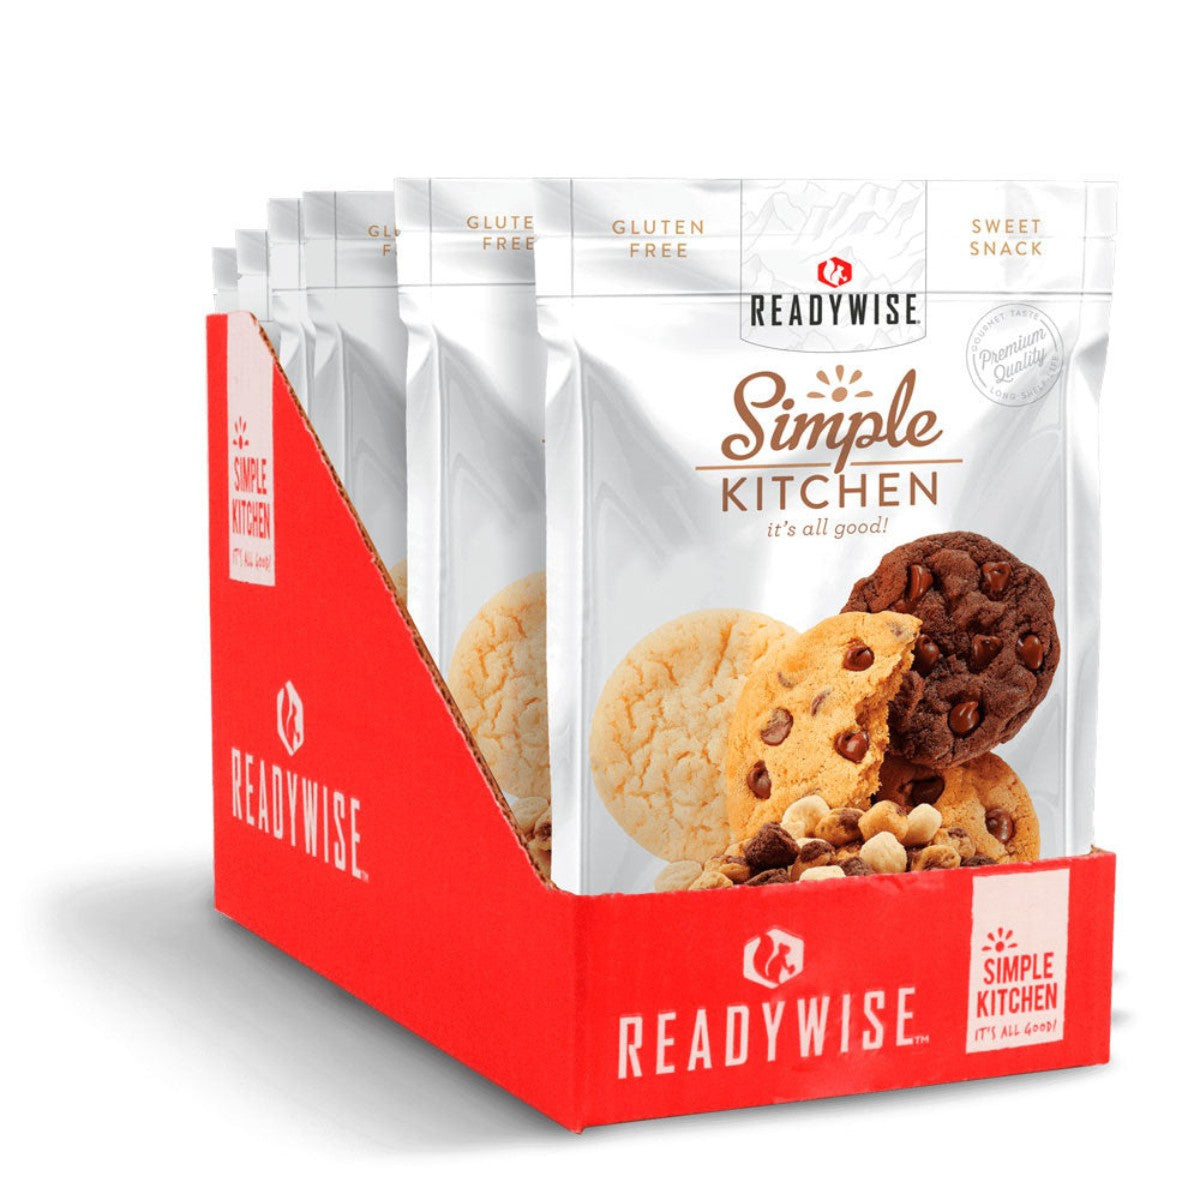 ReadyWise Single Simple Kitchen Cookie Dough Medley